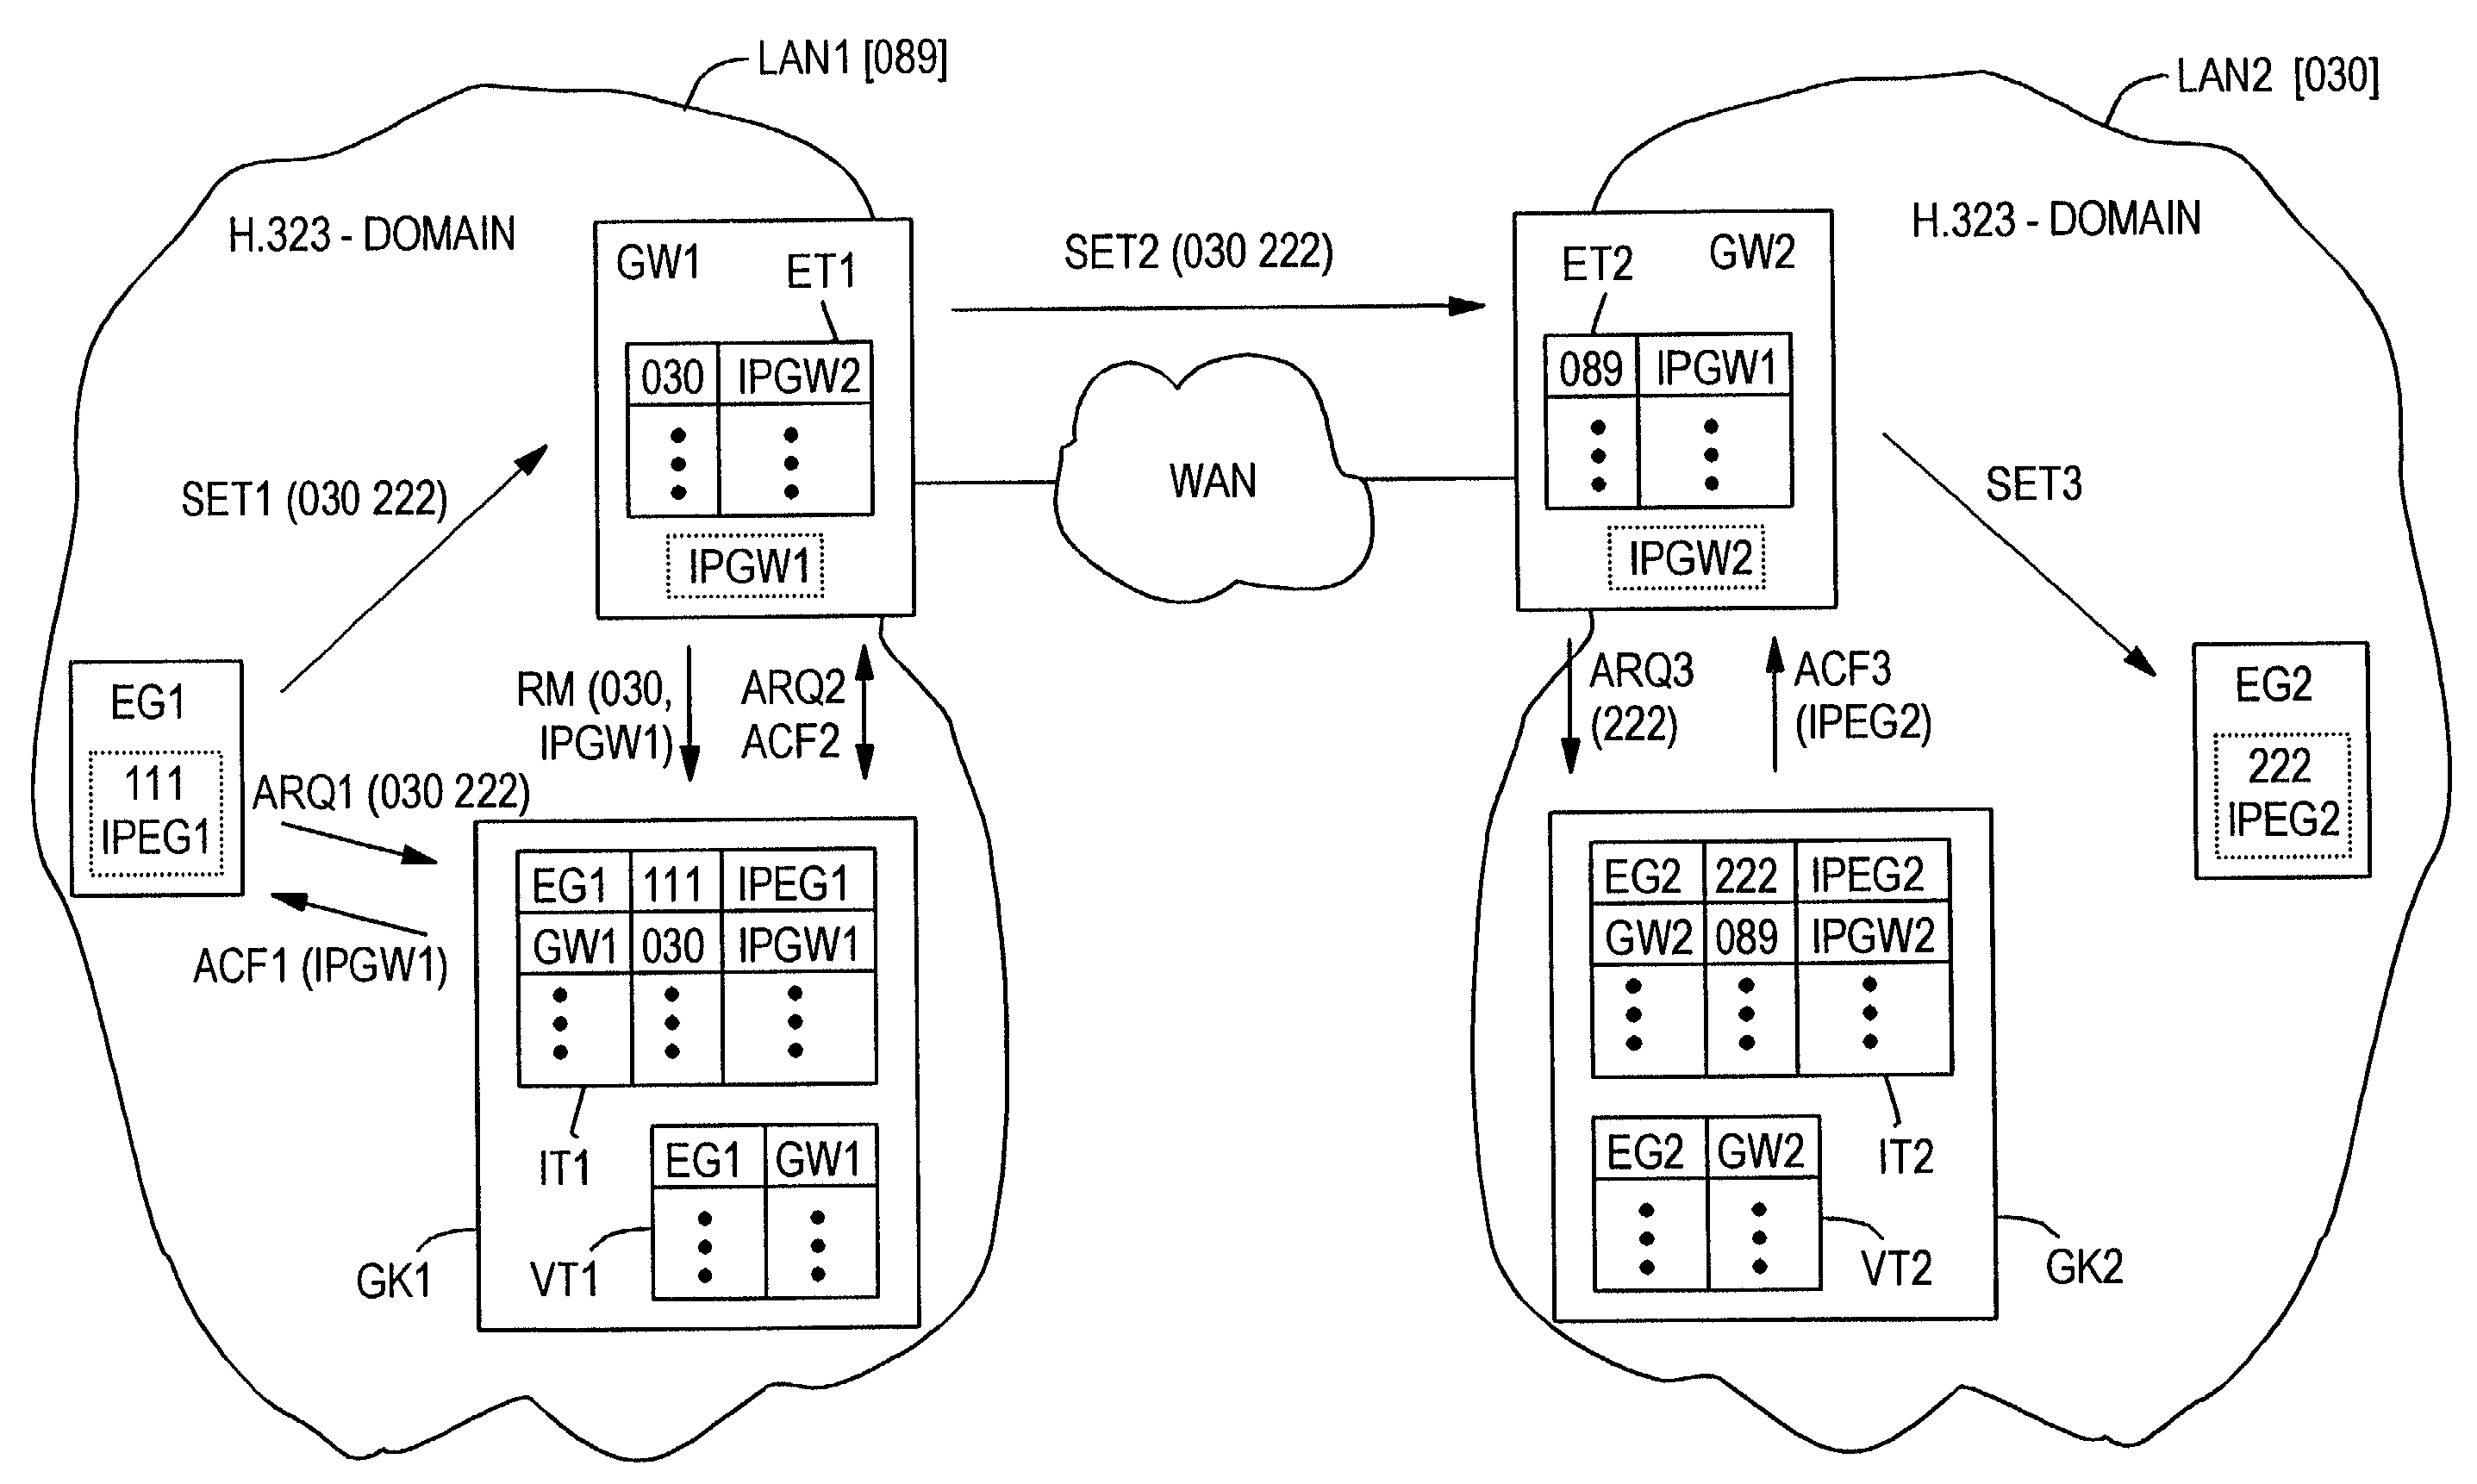 Method for establishing a connection from a terminal of a communication network to a network-external connection destination, and associated apparatus and network